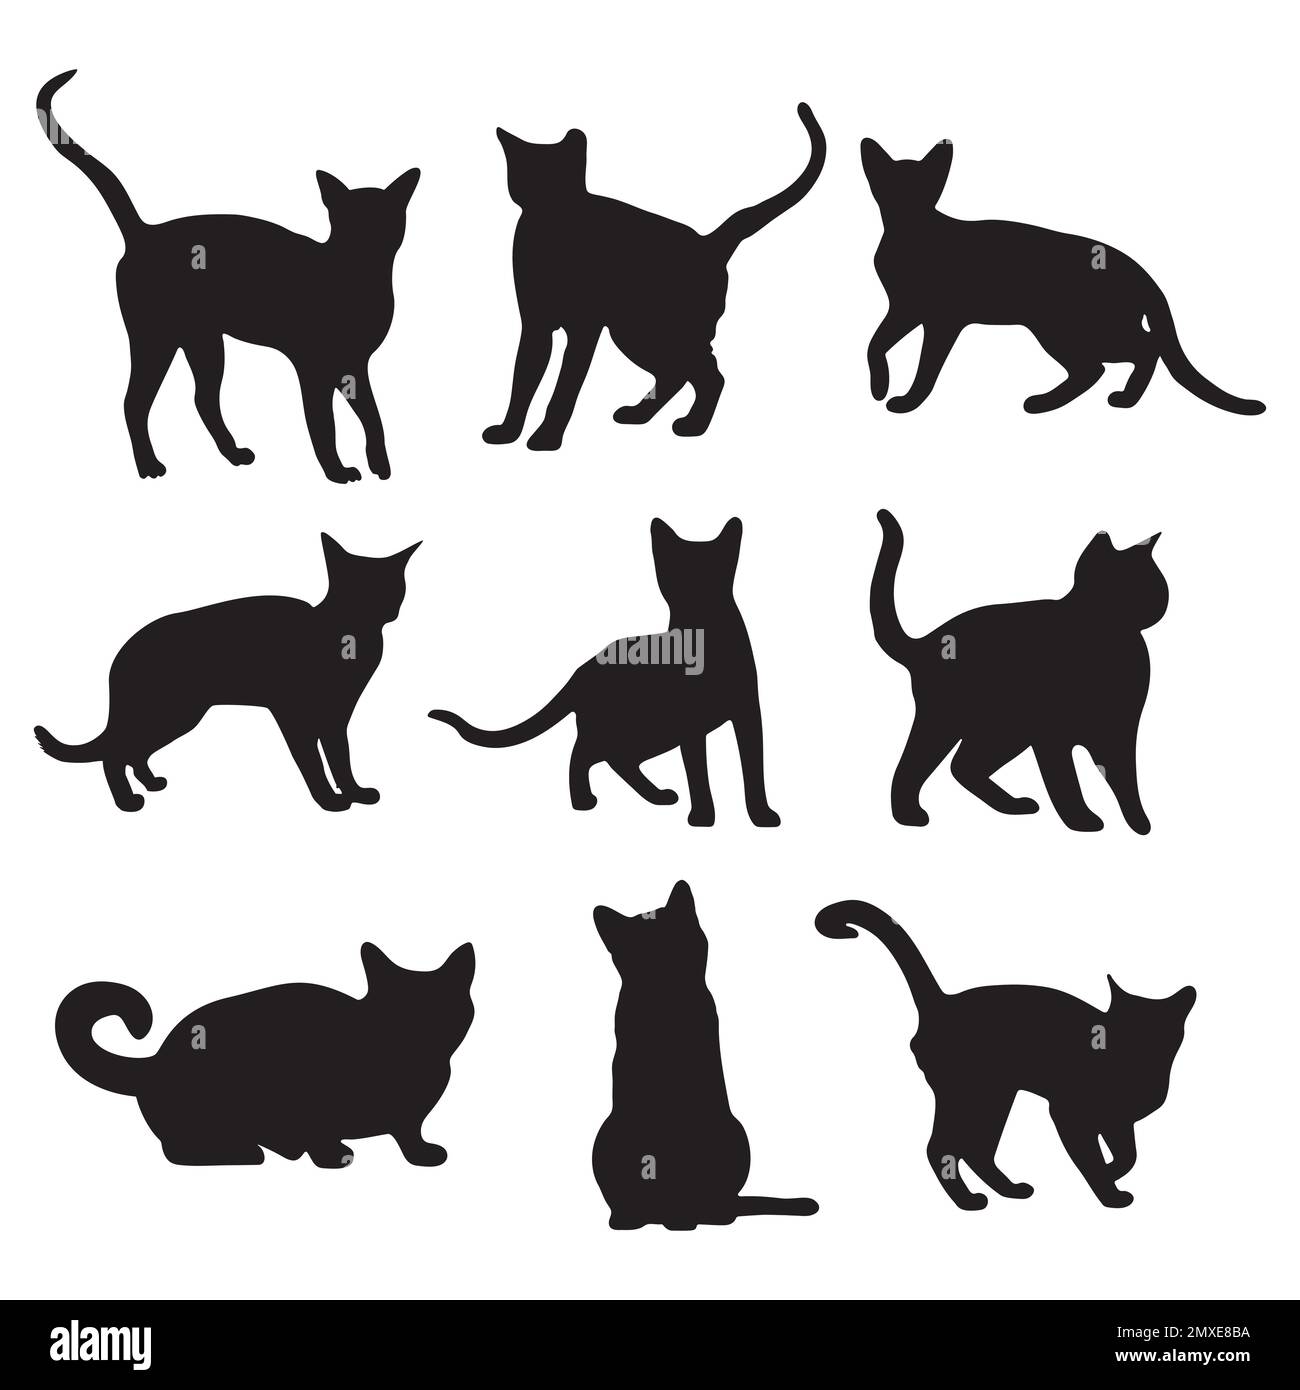 Cats silhouette On White Background Stock Vector